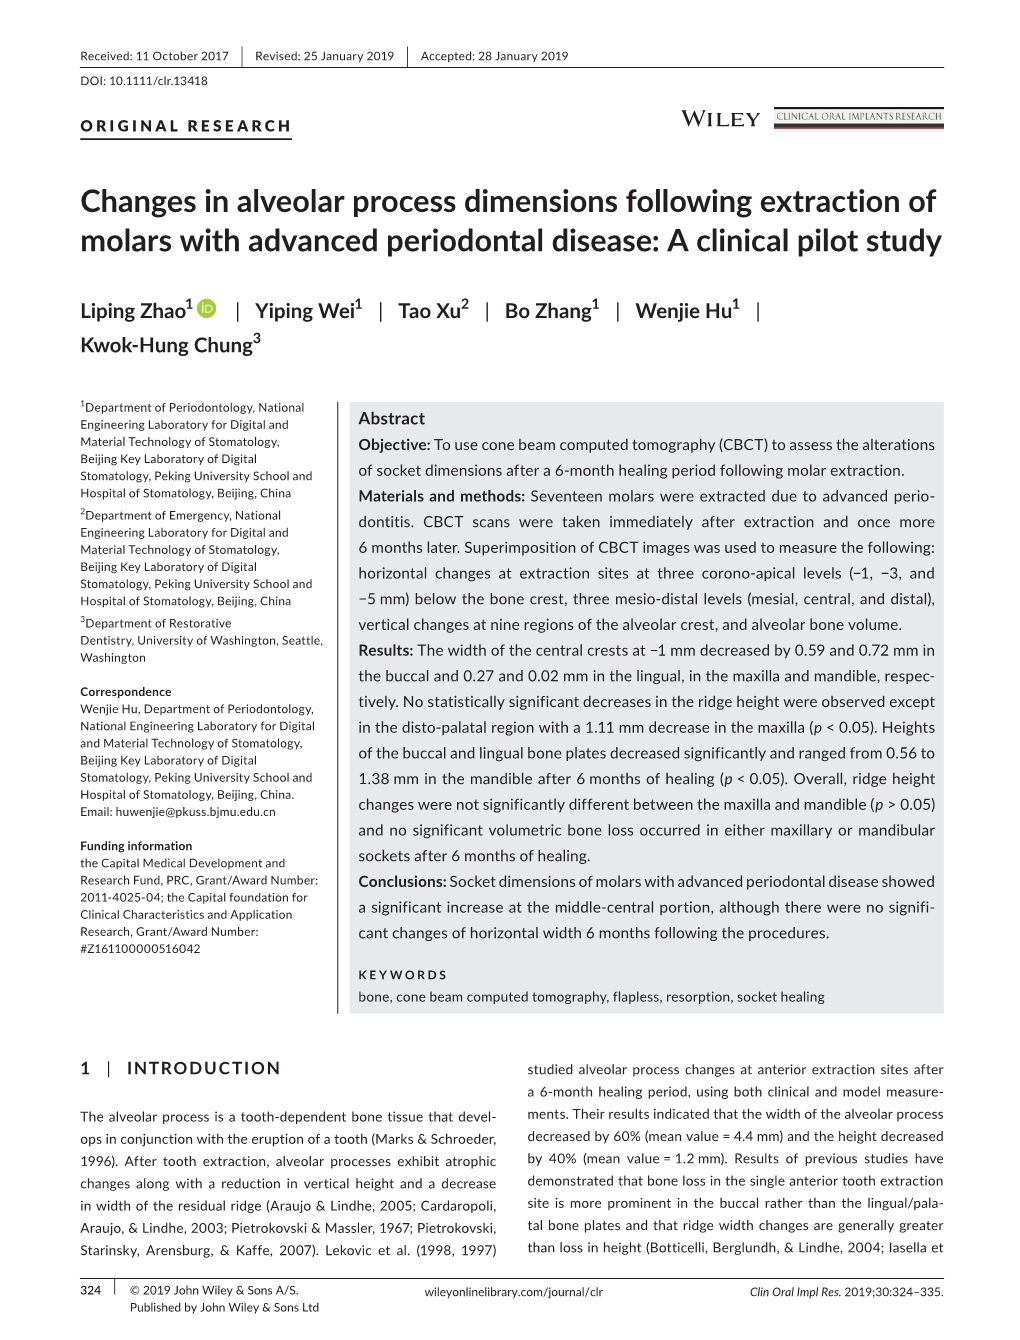 Changes in Alveolar Process Dimensions Following Extraction of Molars with Advanced Periodontal Disease: a Clinical Pilot Study